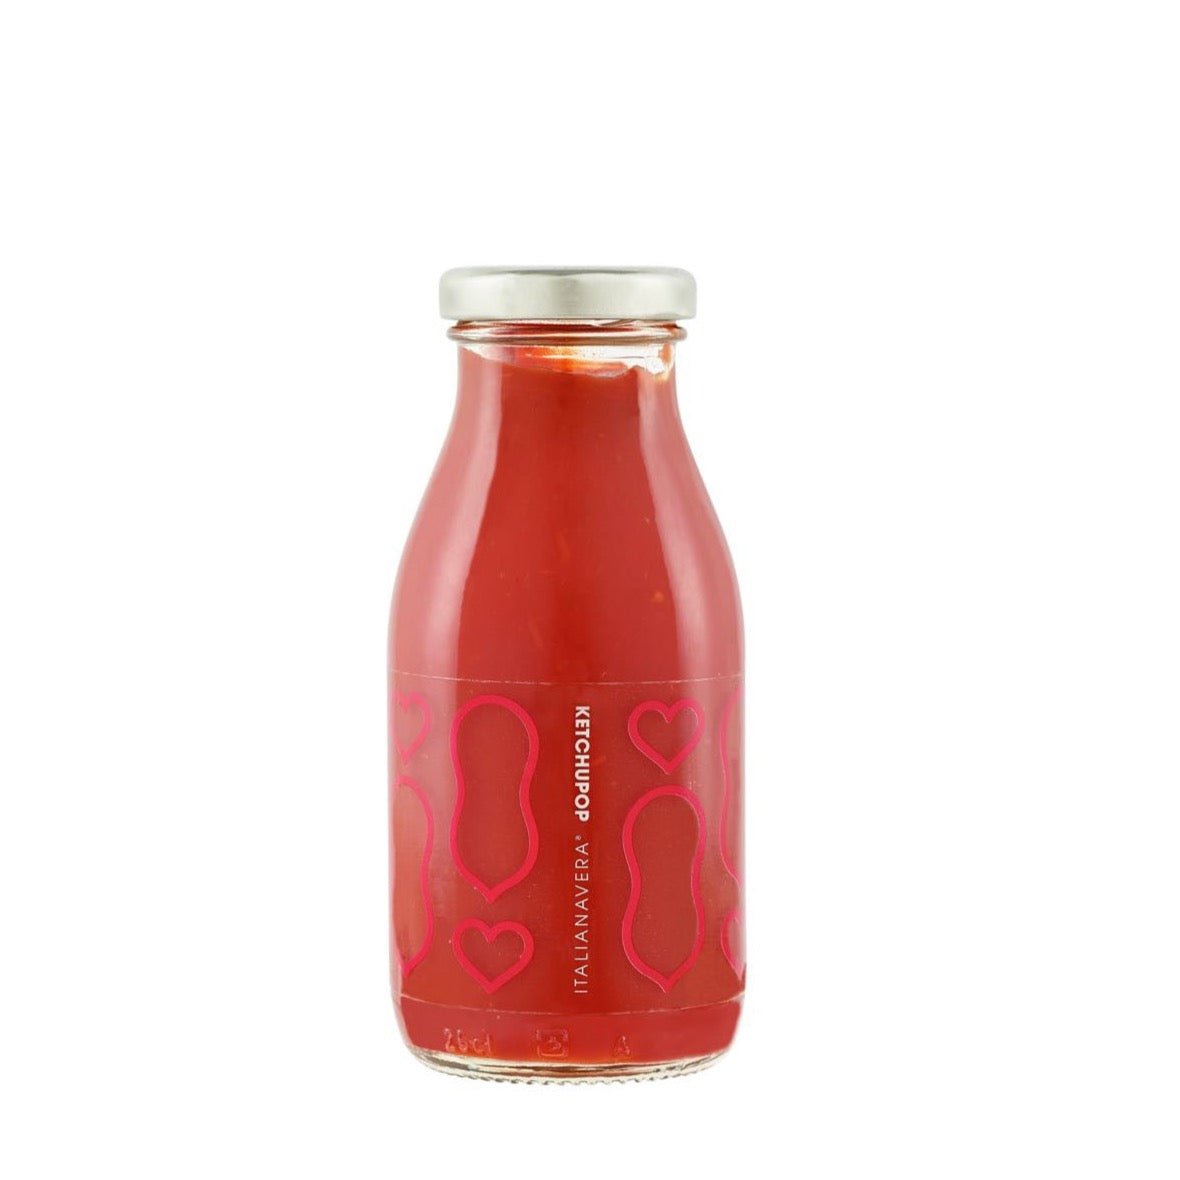 Italianavera San Marzano DOP Ketchup 260g (glass bottle)  | Imported and distributed in the UK by Just Gourmet Foods